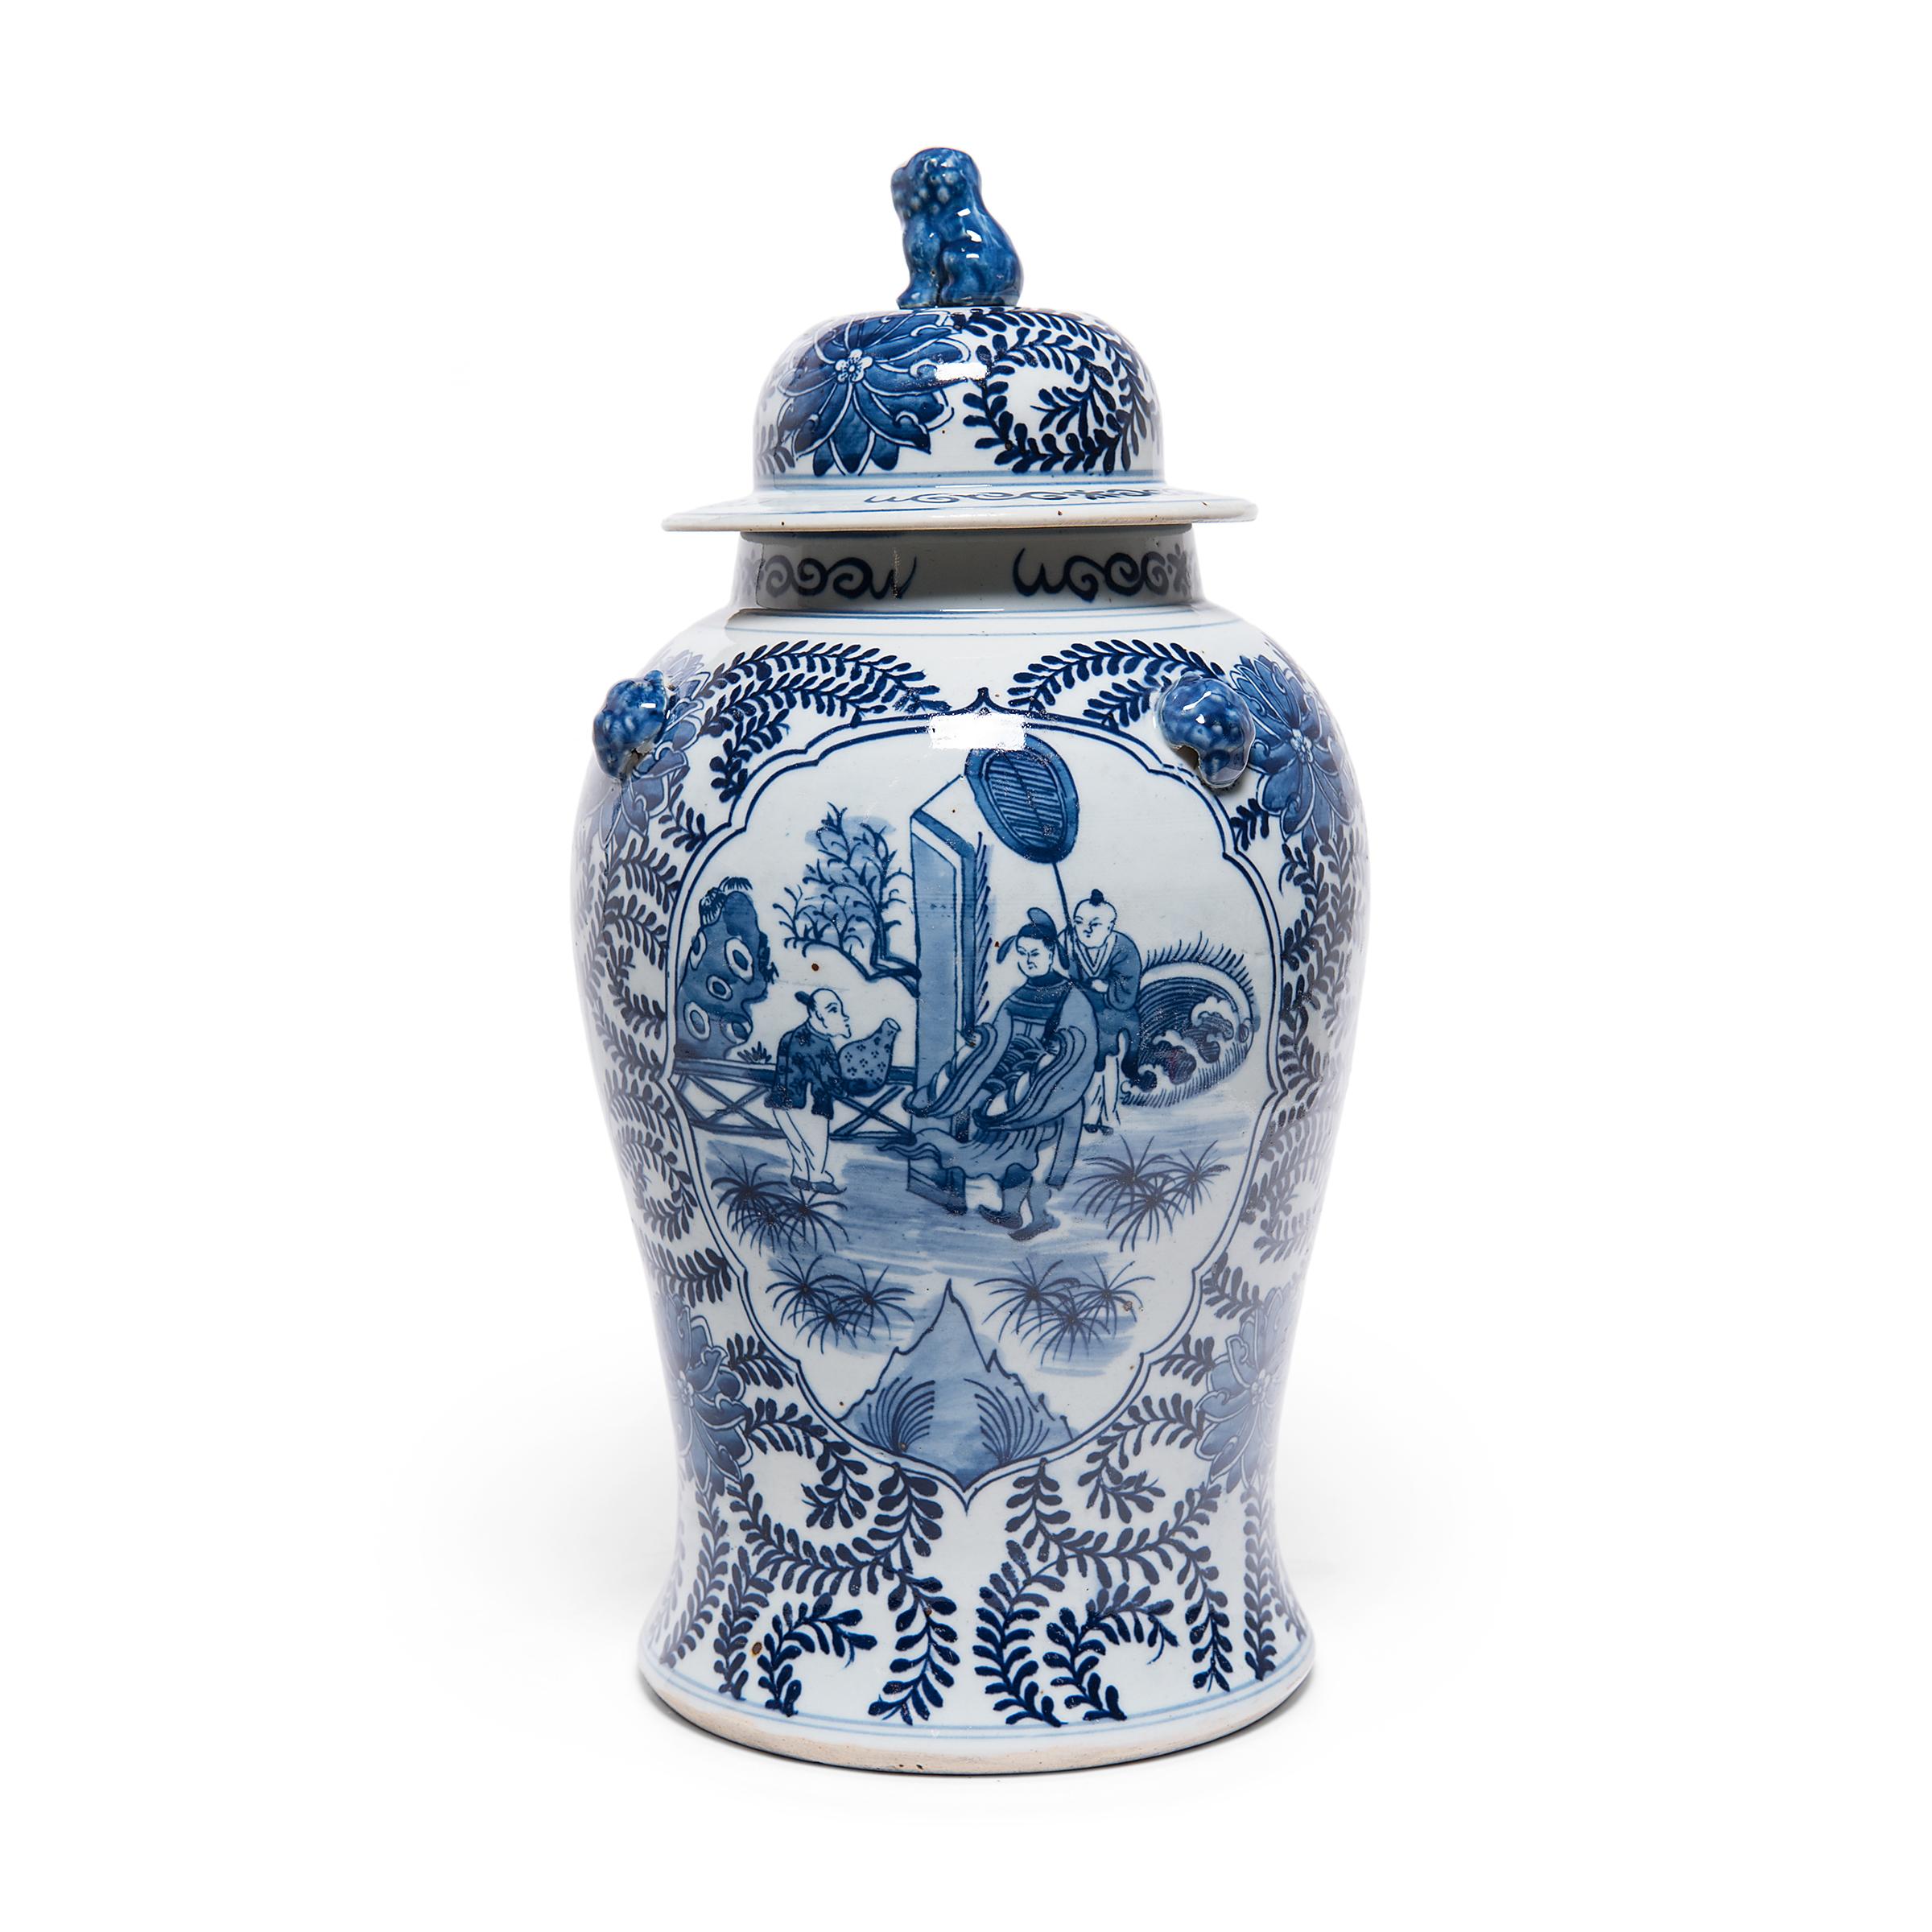 This contemporary lidded baluster jar continues the centuries-old tradition of Chinese blue-and-white porcelain ware. Painted with cobalt pigments for a brilliant blue finish, the jar is densely patterned with trailing vine scrollwork and